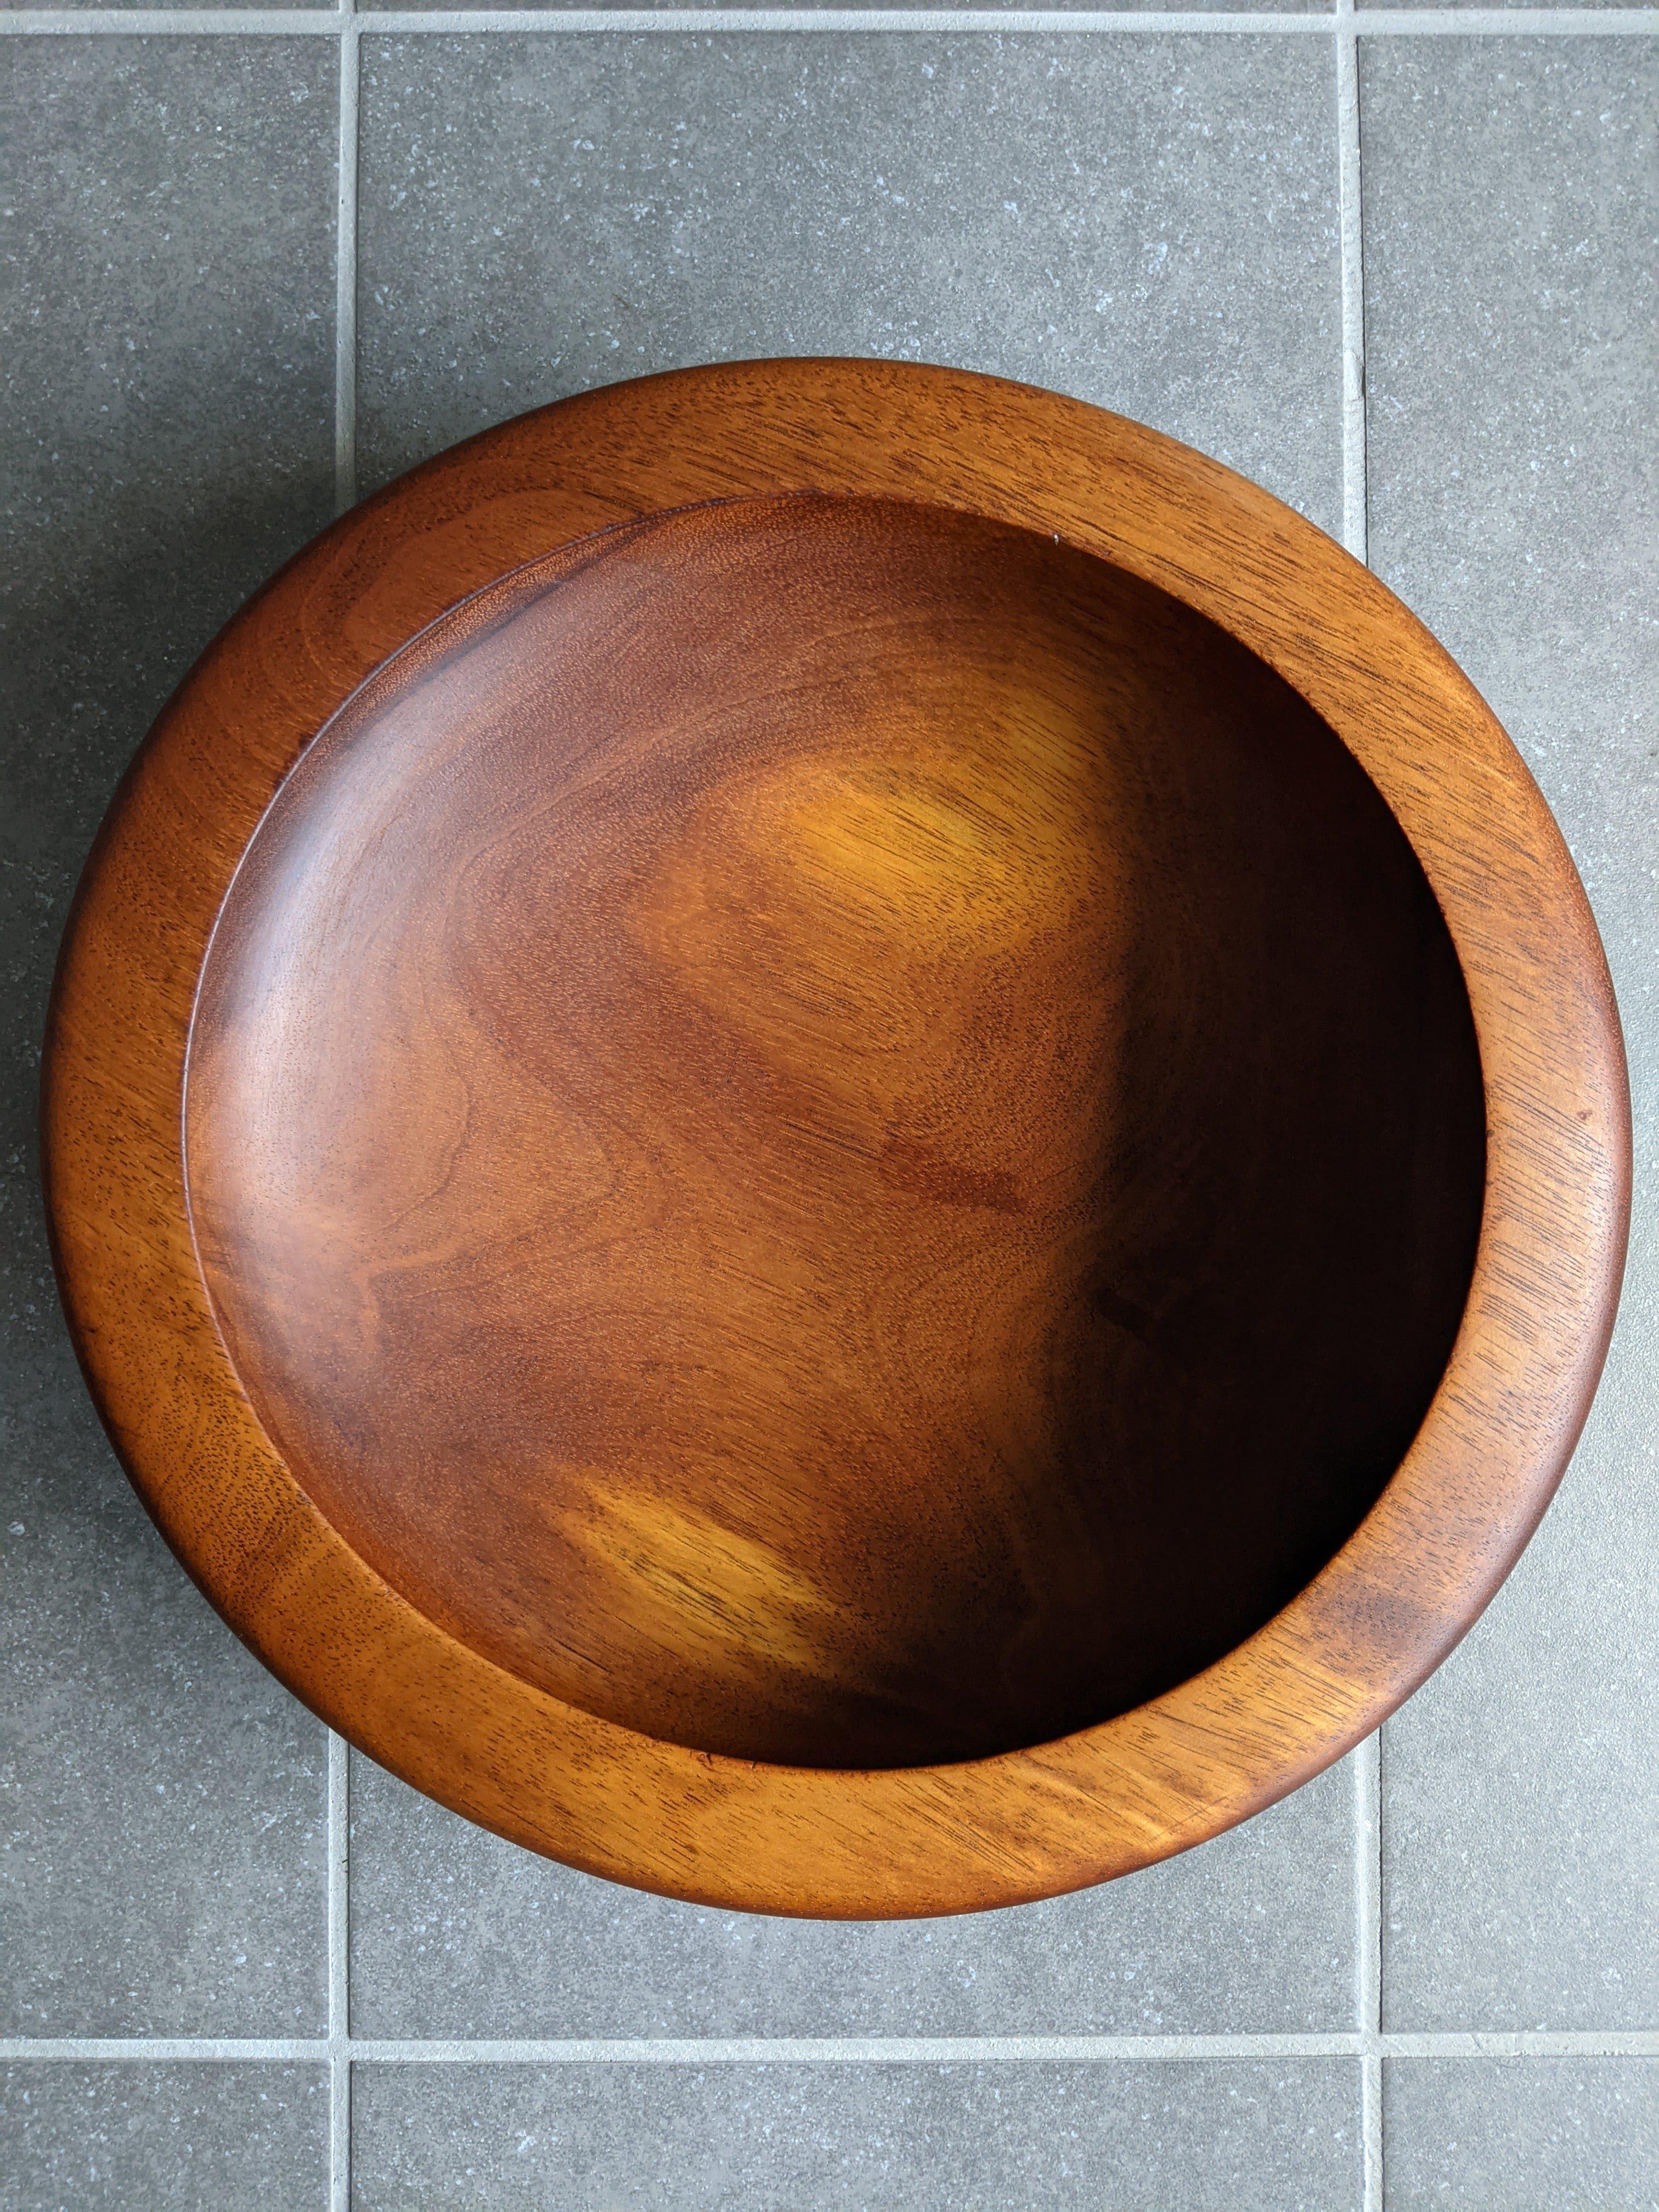 Awesome grain patterns in this vintage hand turned decorative teak bowl.

Large format, 15x15x4.25 inches

So much teak character